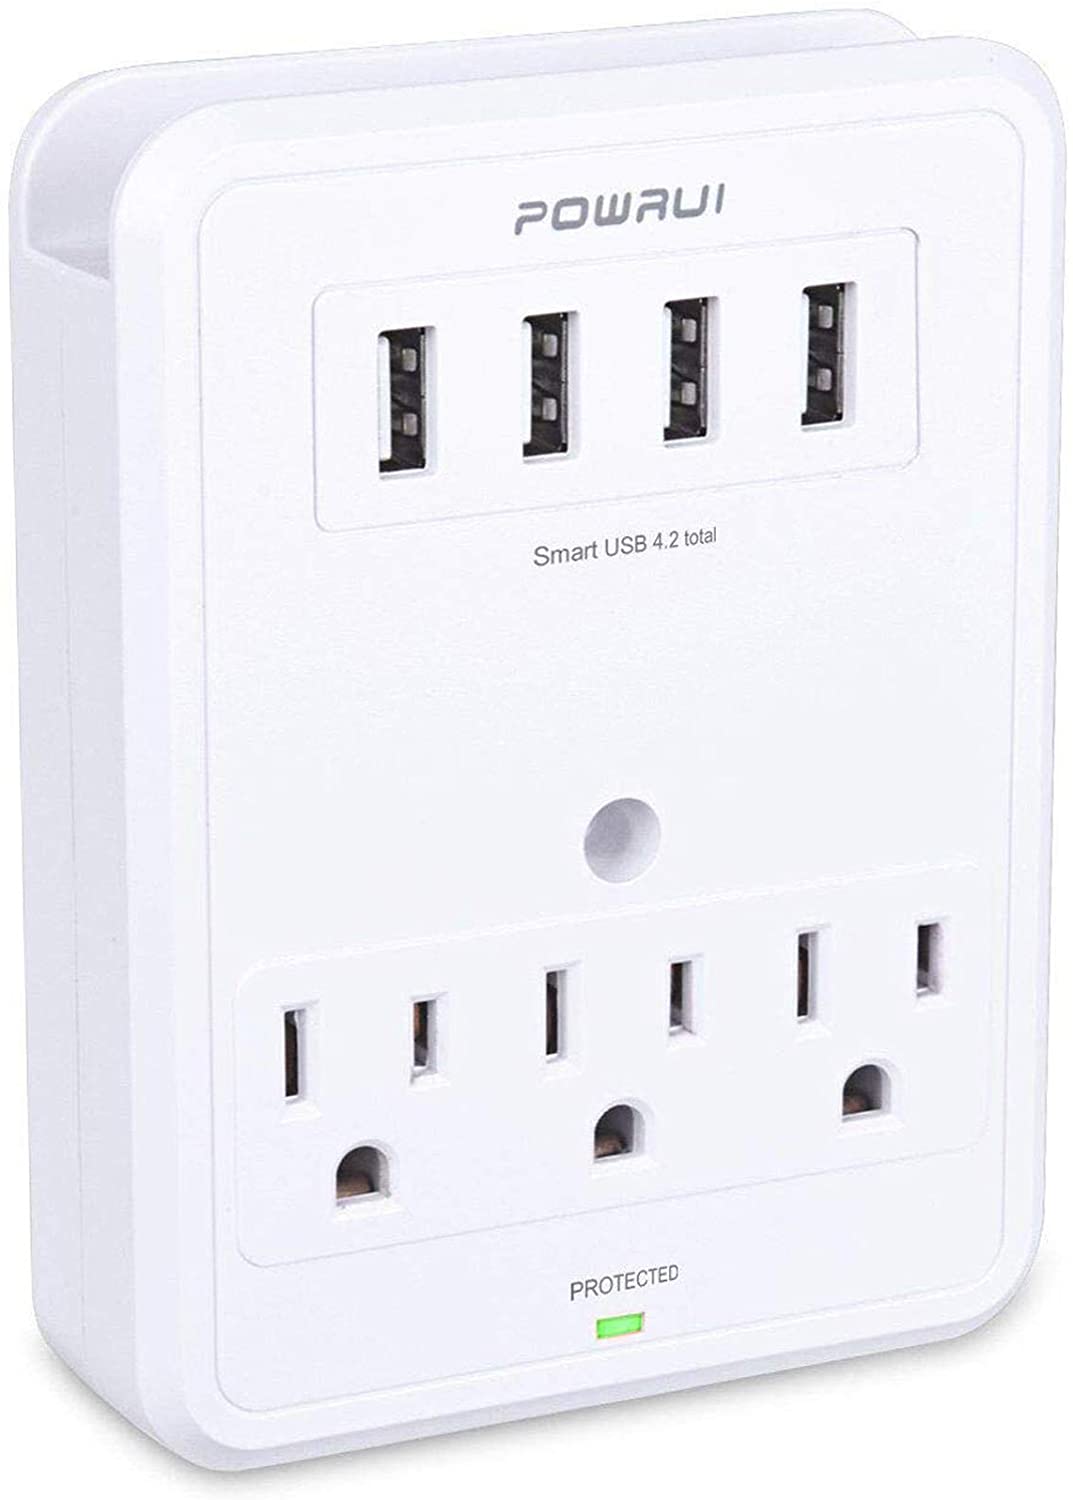 POWRUI Multi Wall Outlet Adapter (Surge Protector) 1680 Joules with 4-USB Ports Wall Charger for $11.18 + FSSS